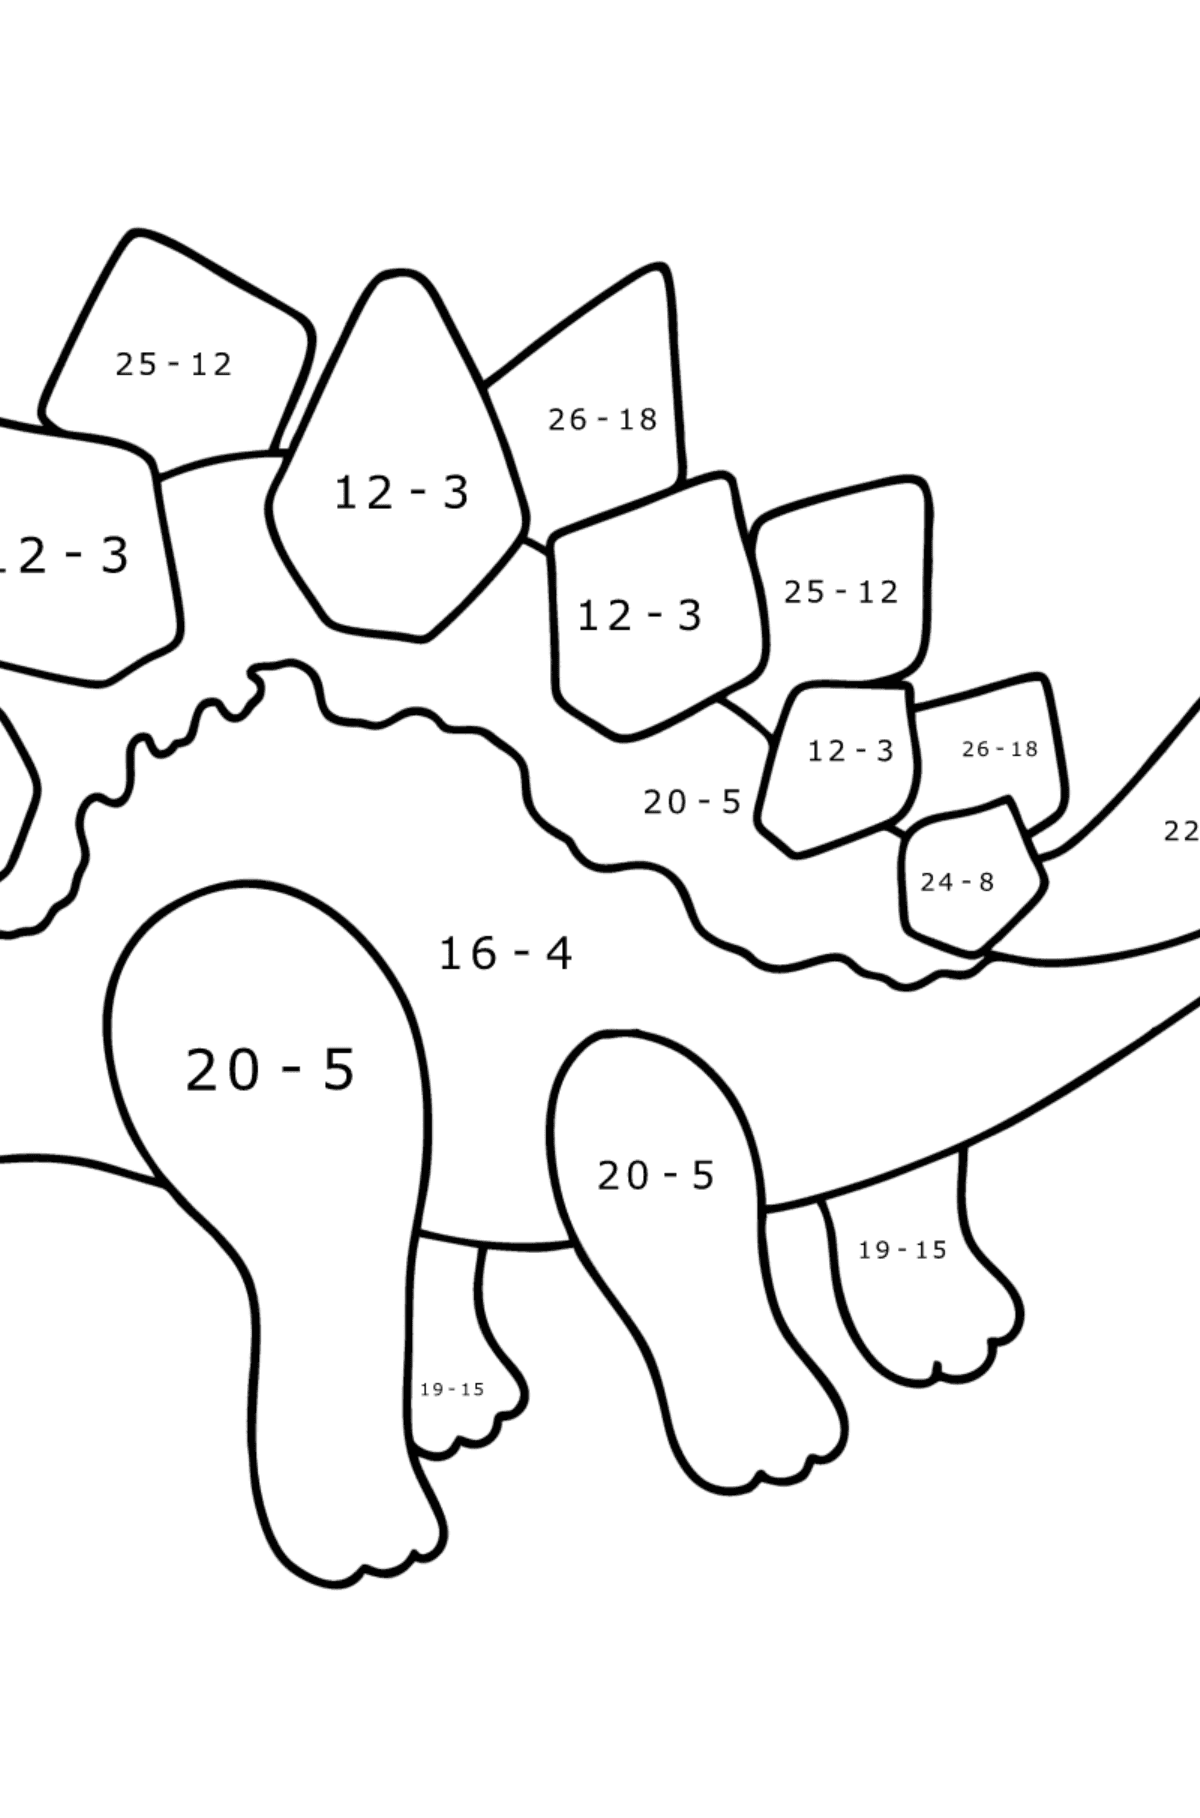 Stegosaurus coloring page - Math Coloring - Subtraction for Kids